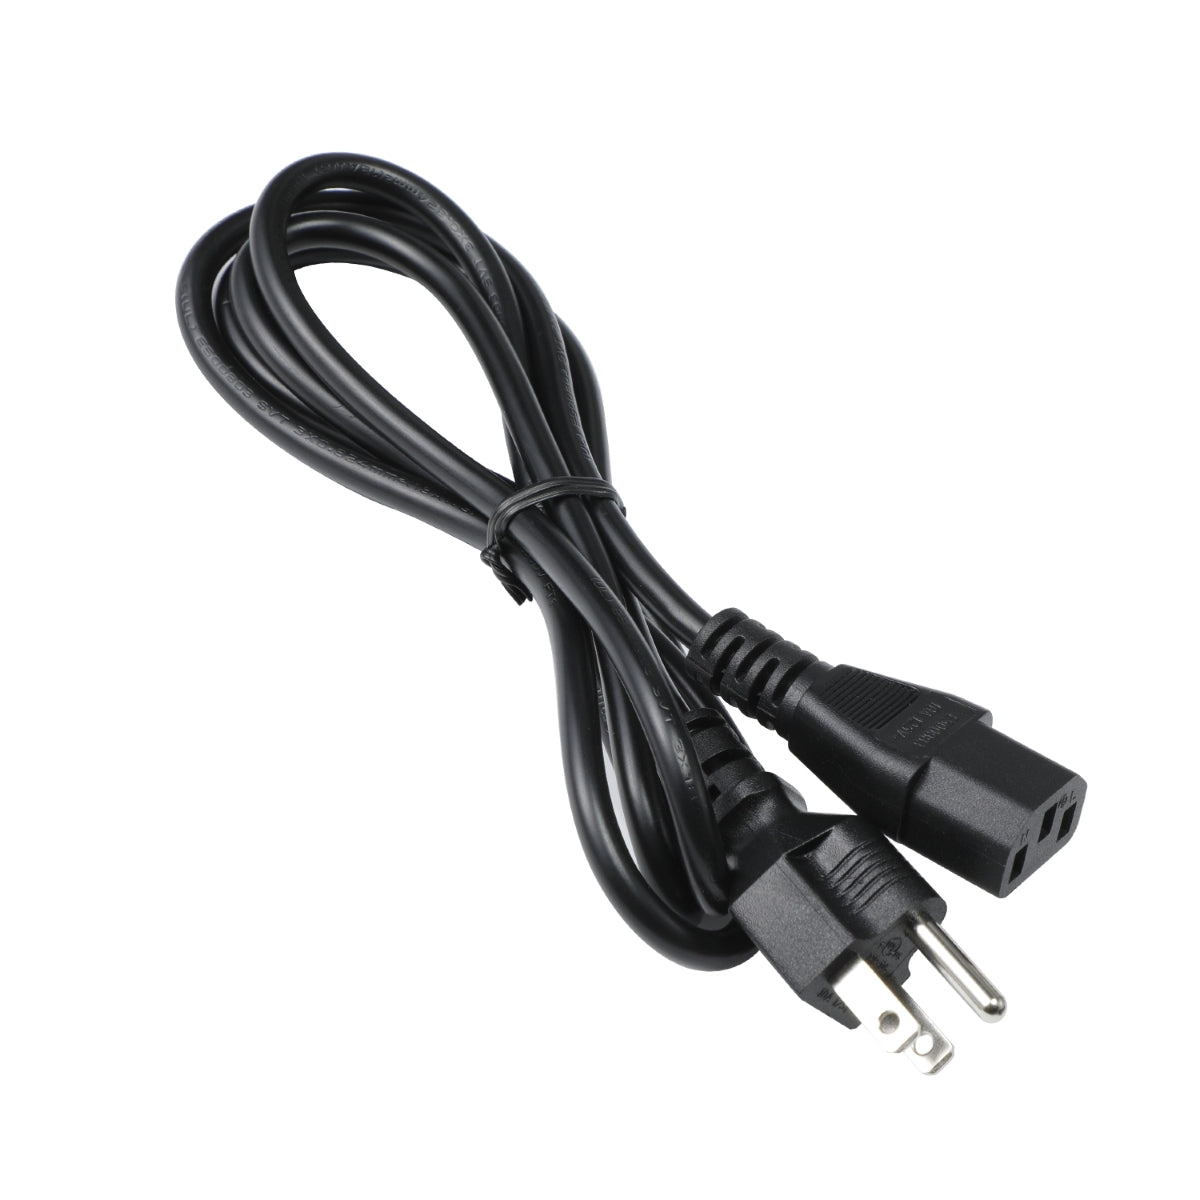 Power Cord for HP Pavilion 550-127c Computer.